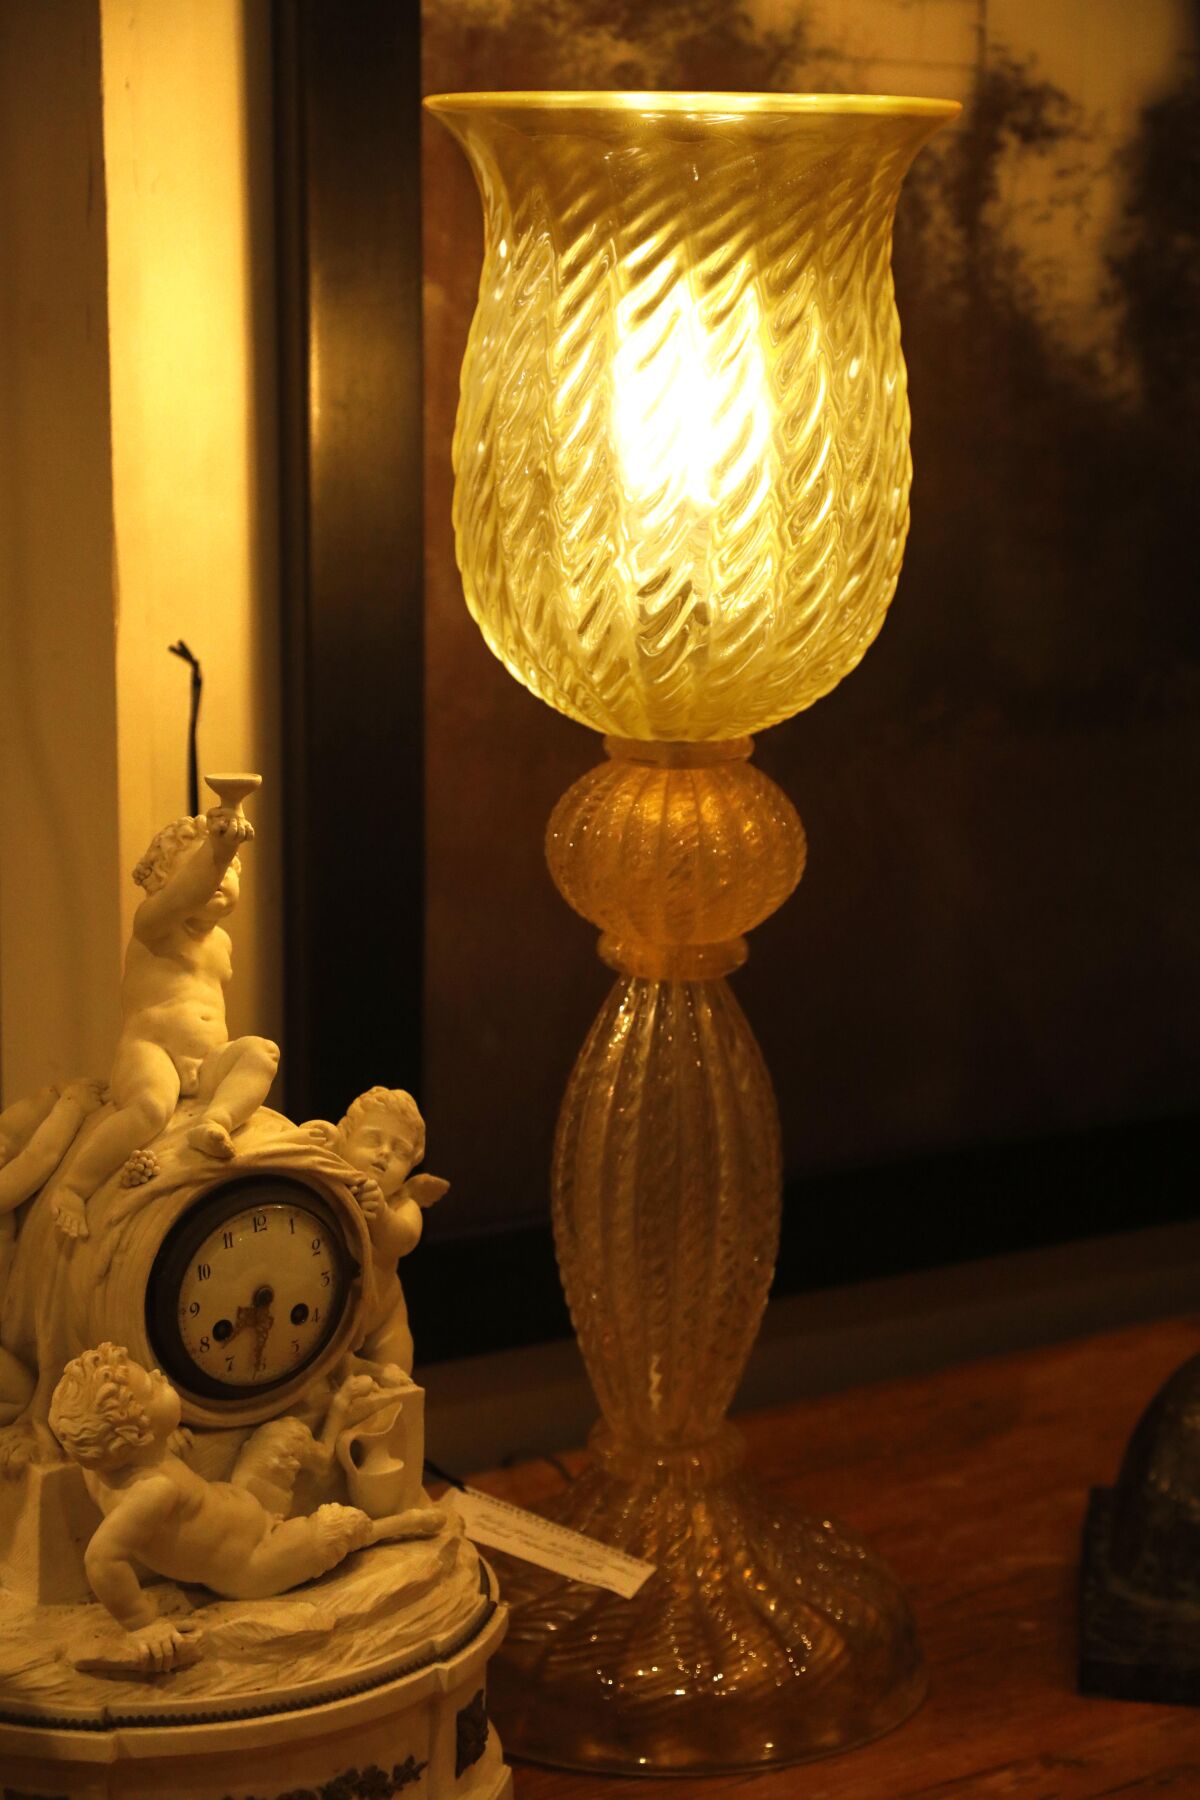 A 1930s Murano glass lamp at Summerland Antique Collective.